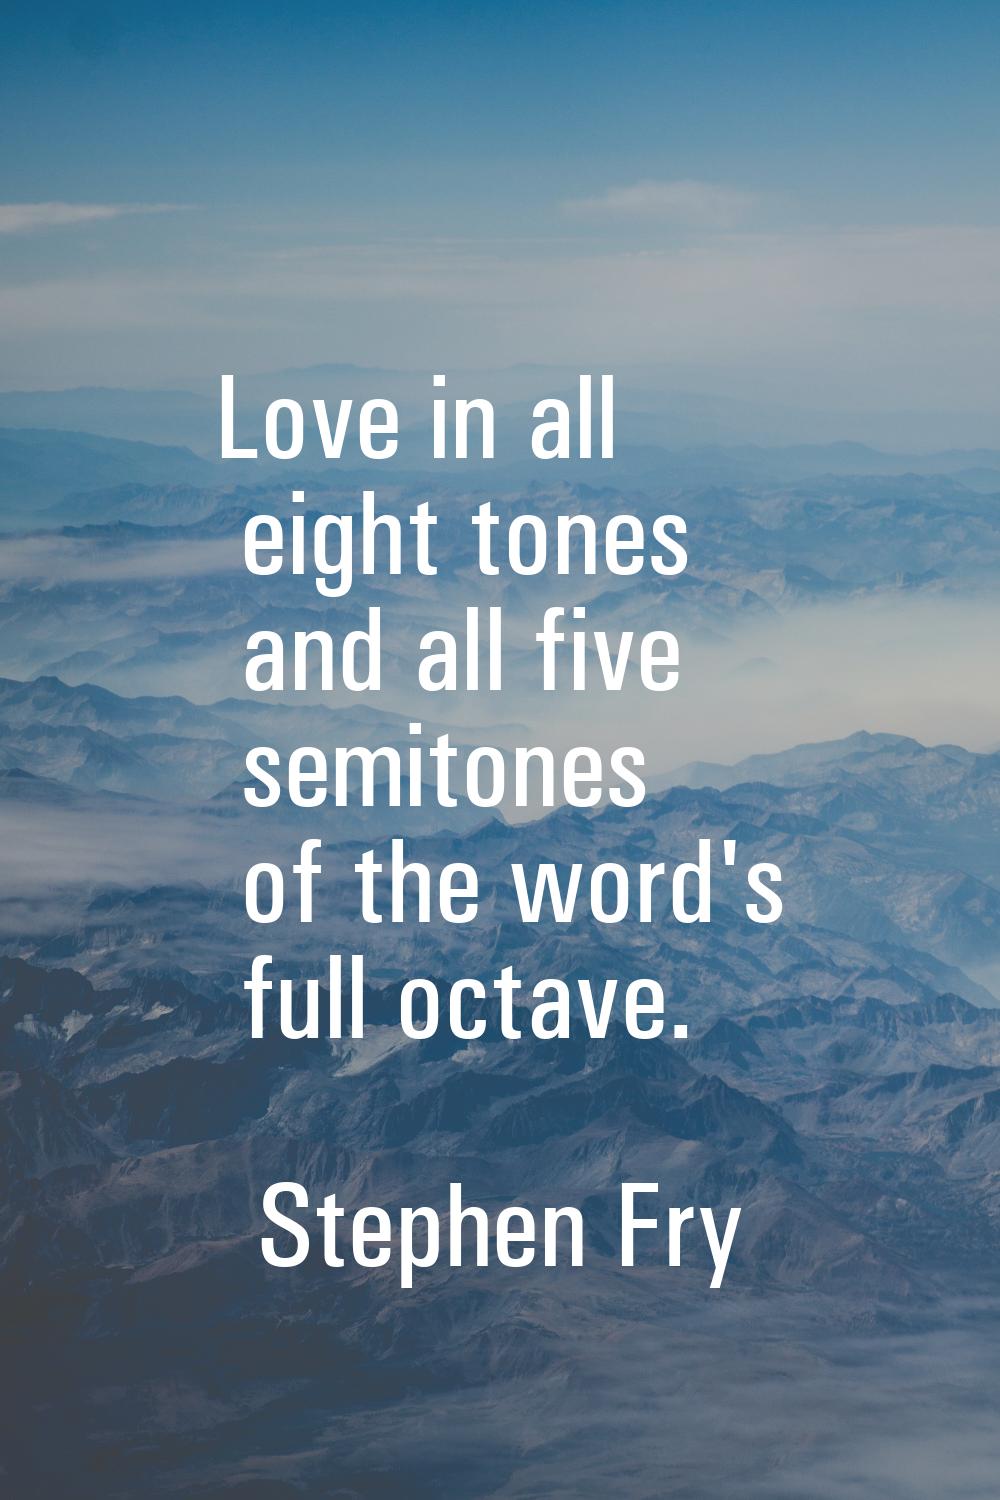 Love in all eight tones and all five semitones of the word's full octave.